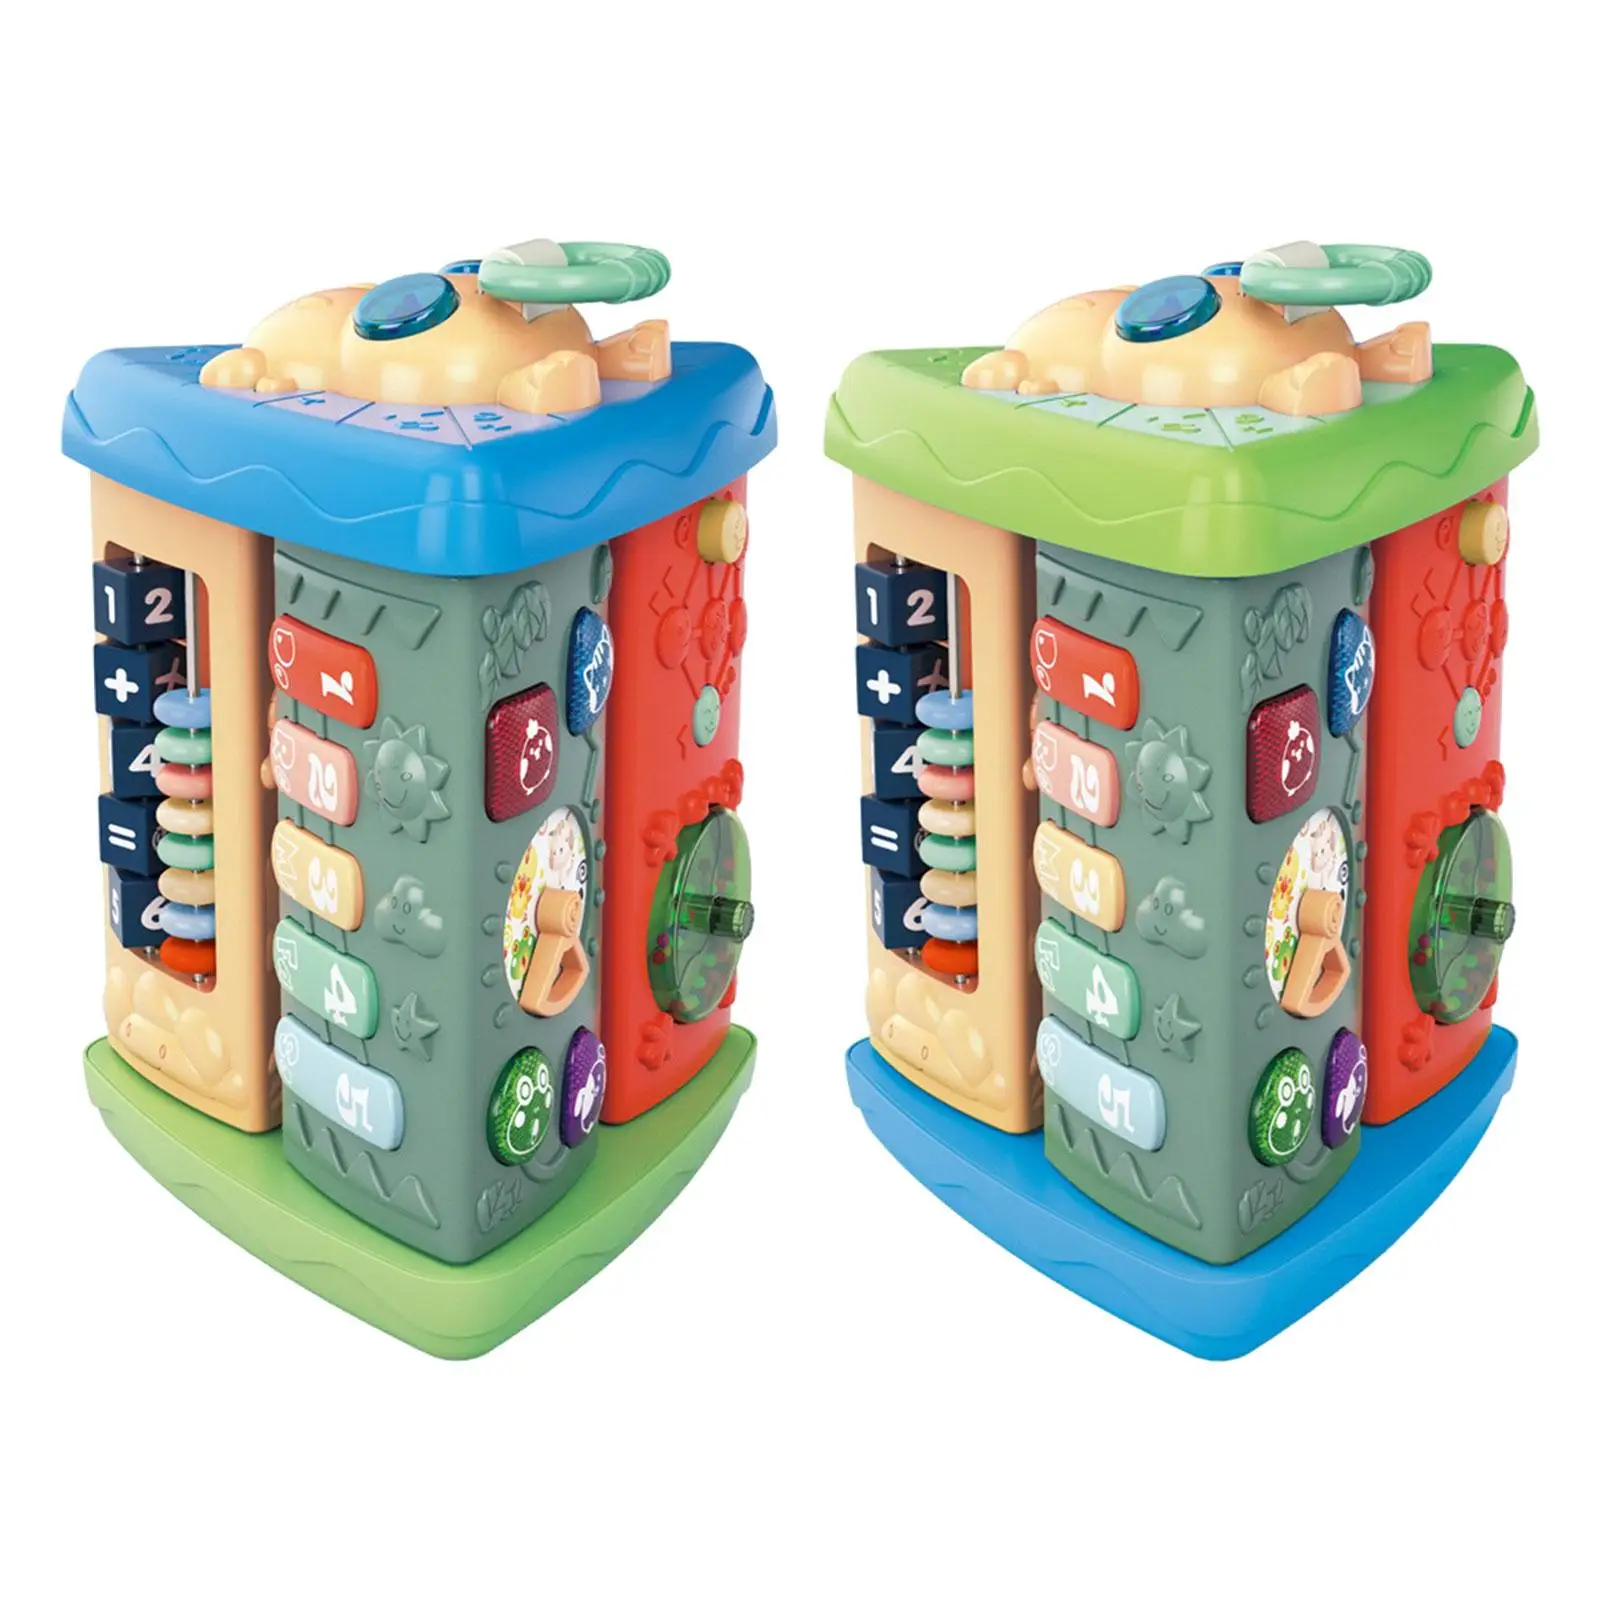 Musical Activity Toy Early Development Activity Toy Musical Activity Cube for Girls Preschool Children Toddlers Holiday Gifts